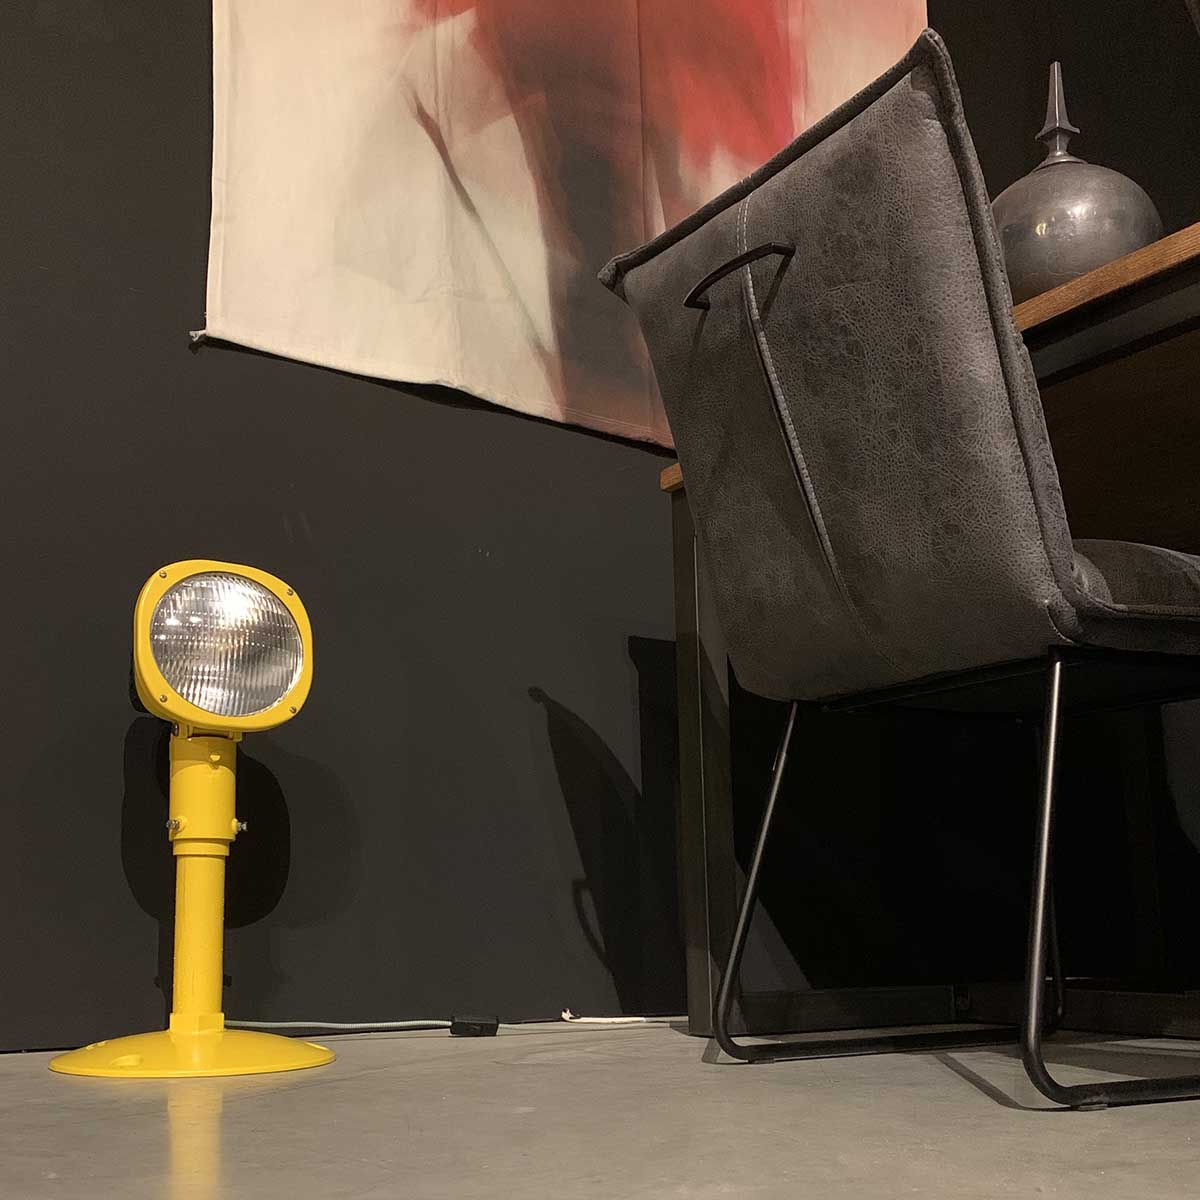 Secondhand Thorn runway approach light on a floor in a living room.